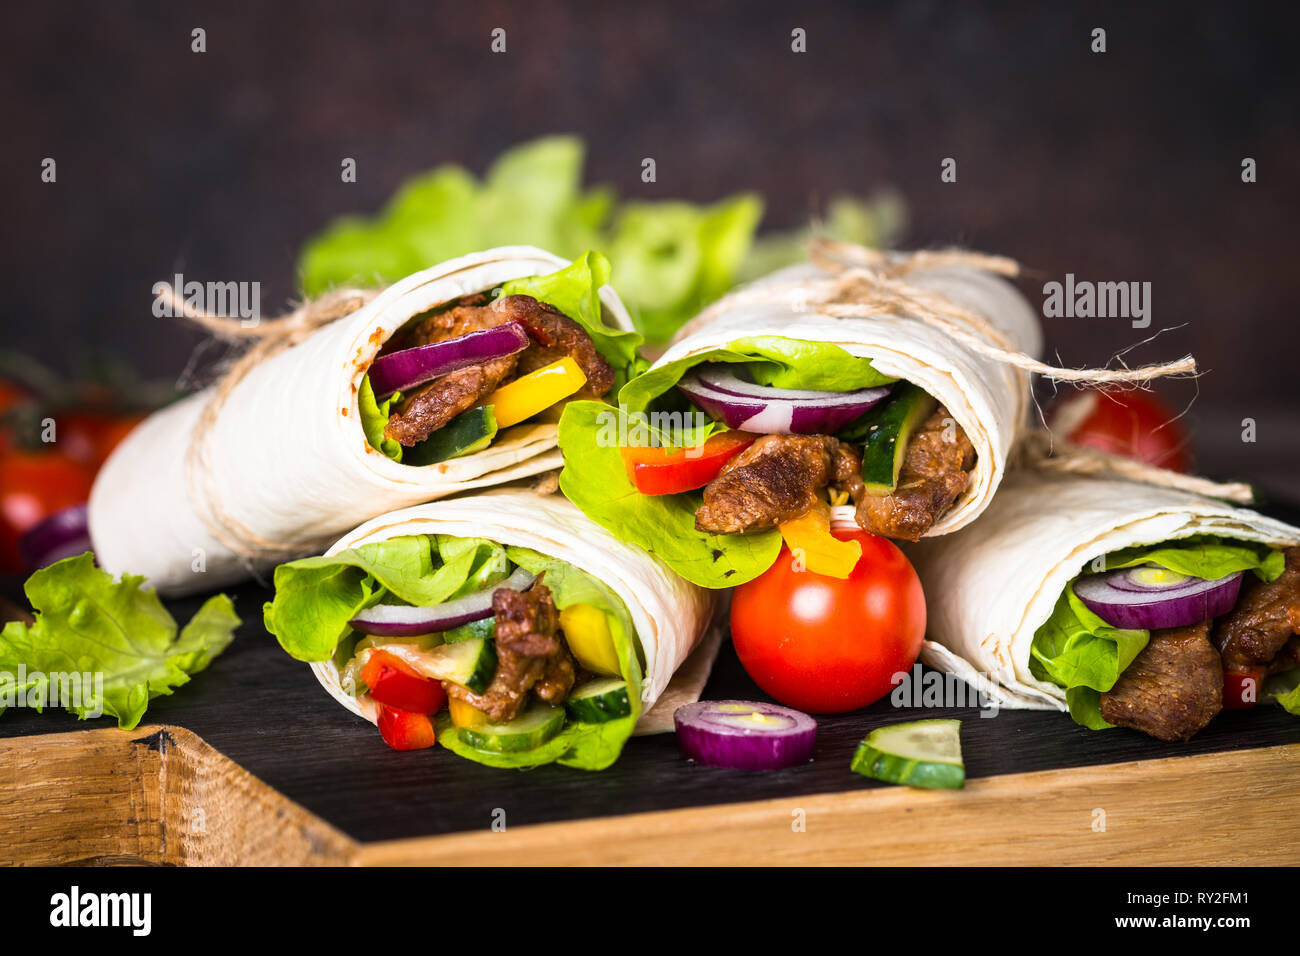 Burritos tortilla wraps with beef and vegetables Stock Photo - Alamy